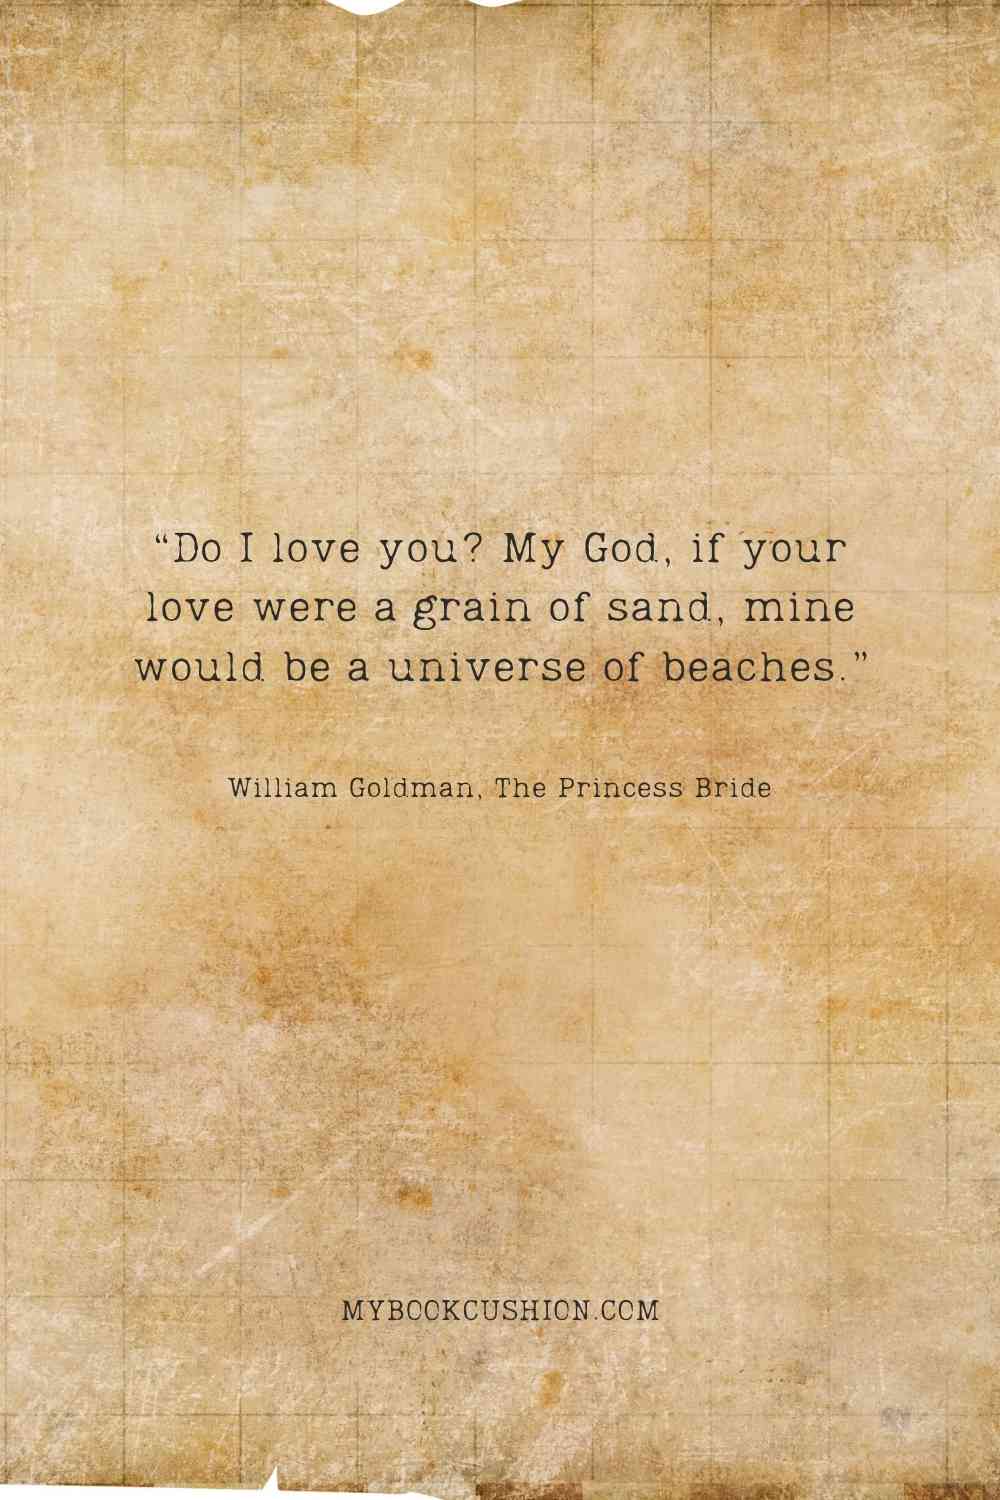 “Do I love you_ My God, if your love were a grain of sand, mine would be a universe of beaches.” - William Goldman, The Princess Bride